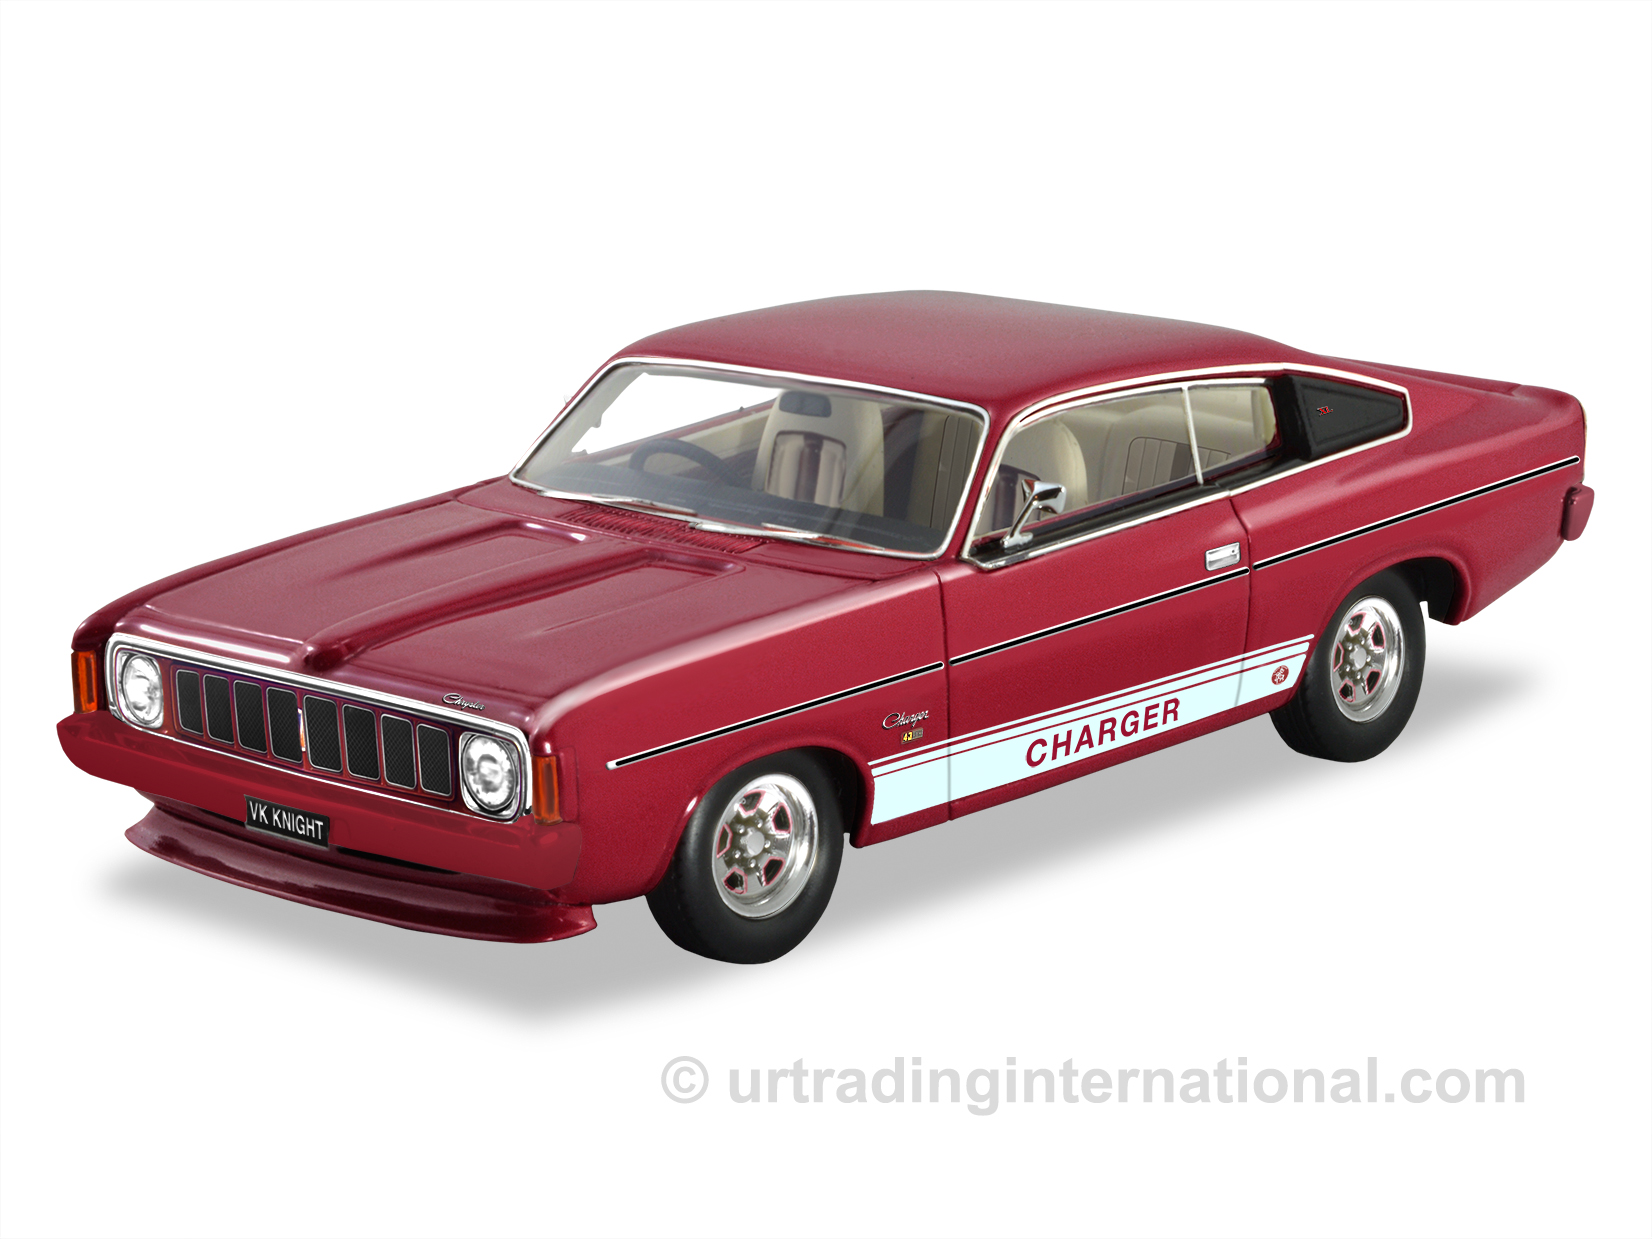 1976 VK Chrysler Charger ‘White Knight Special’ – Amarante Red